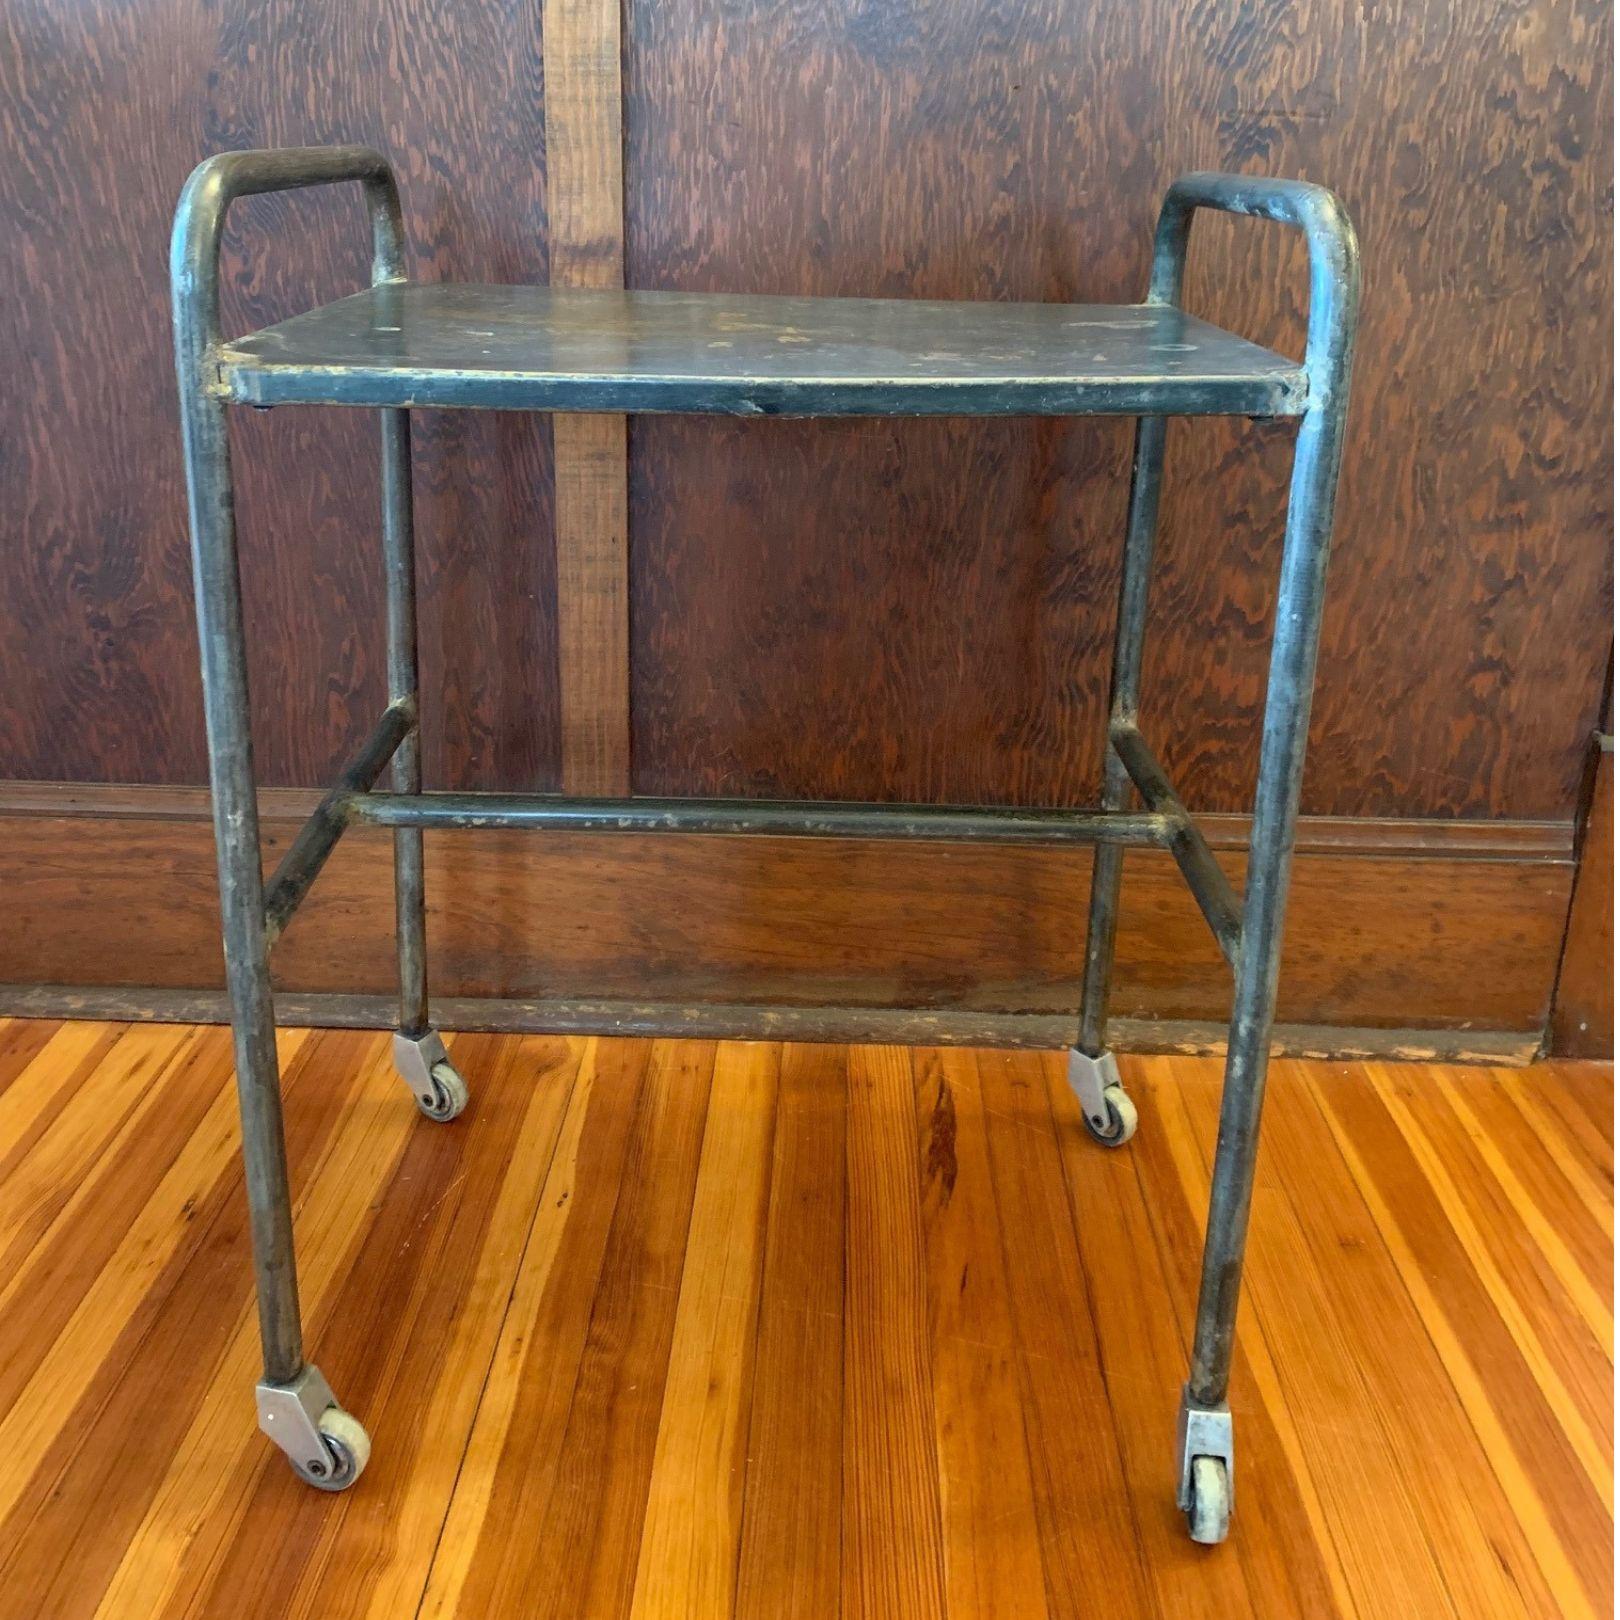 North American Brushed Steel Industrial Side Table on Wheels For Sale